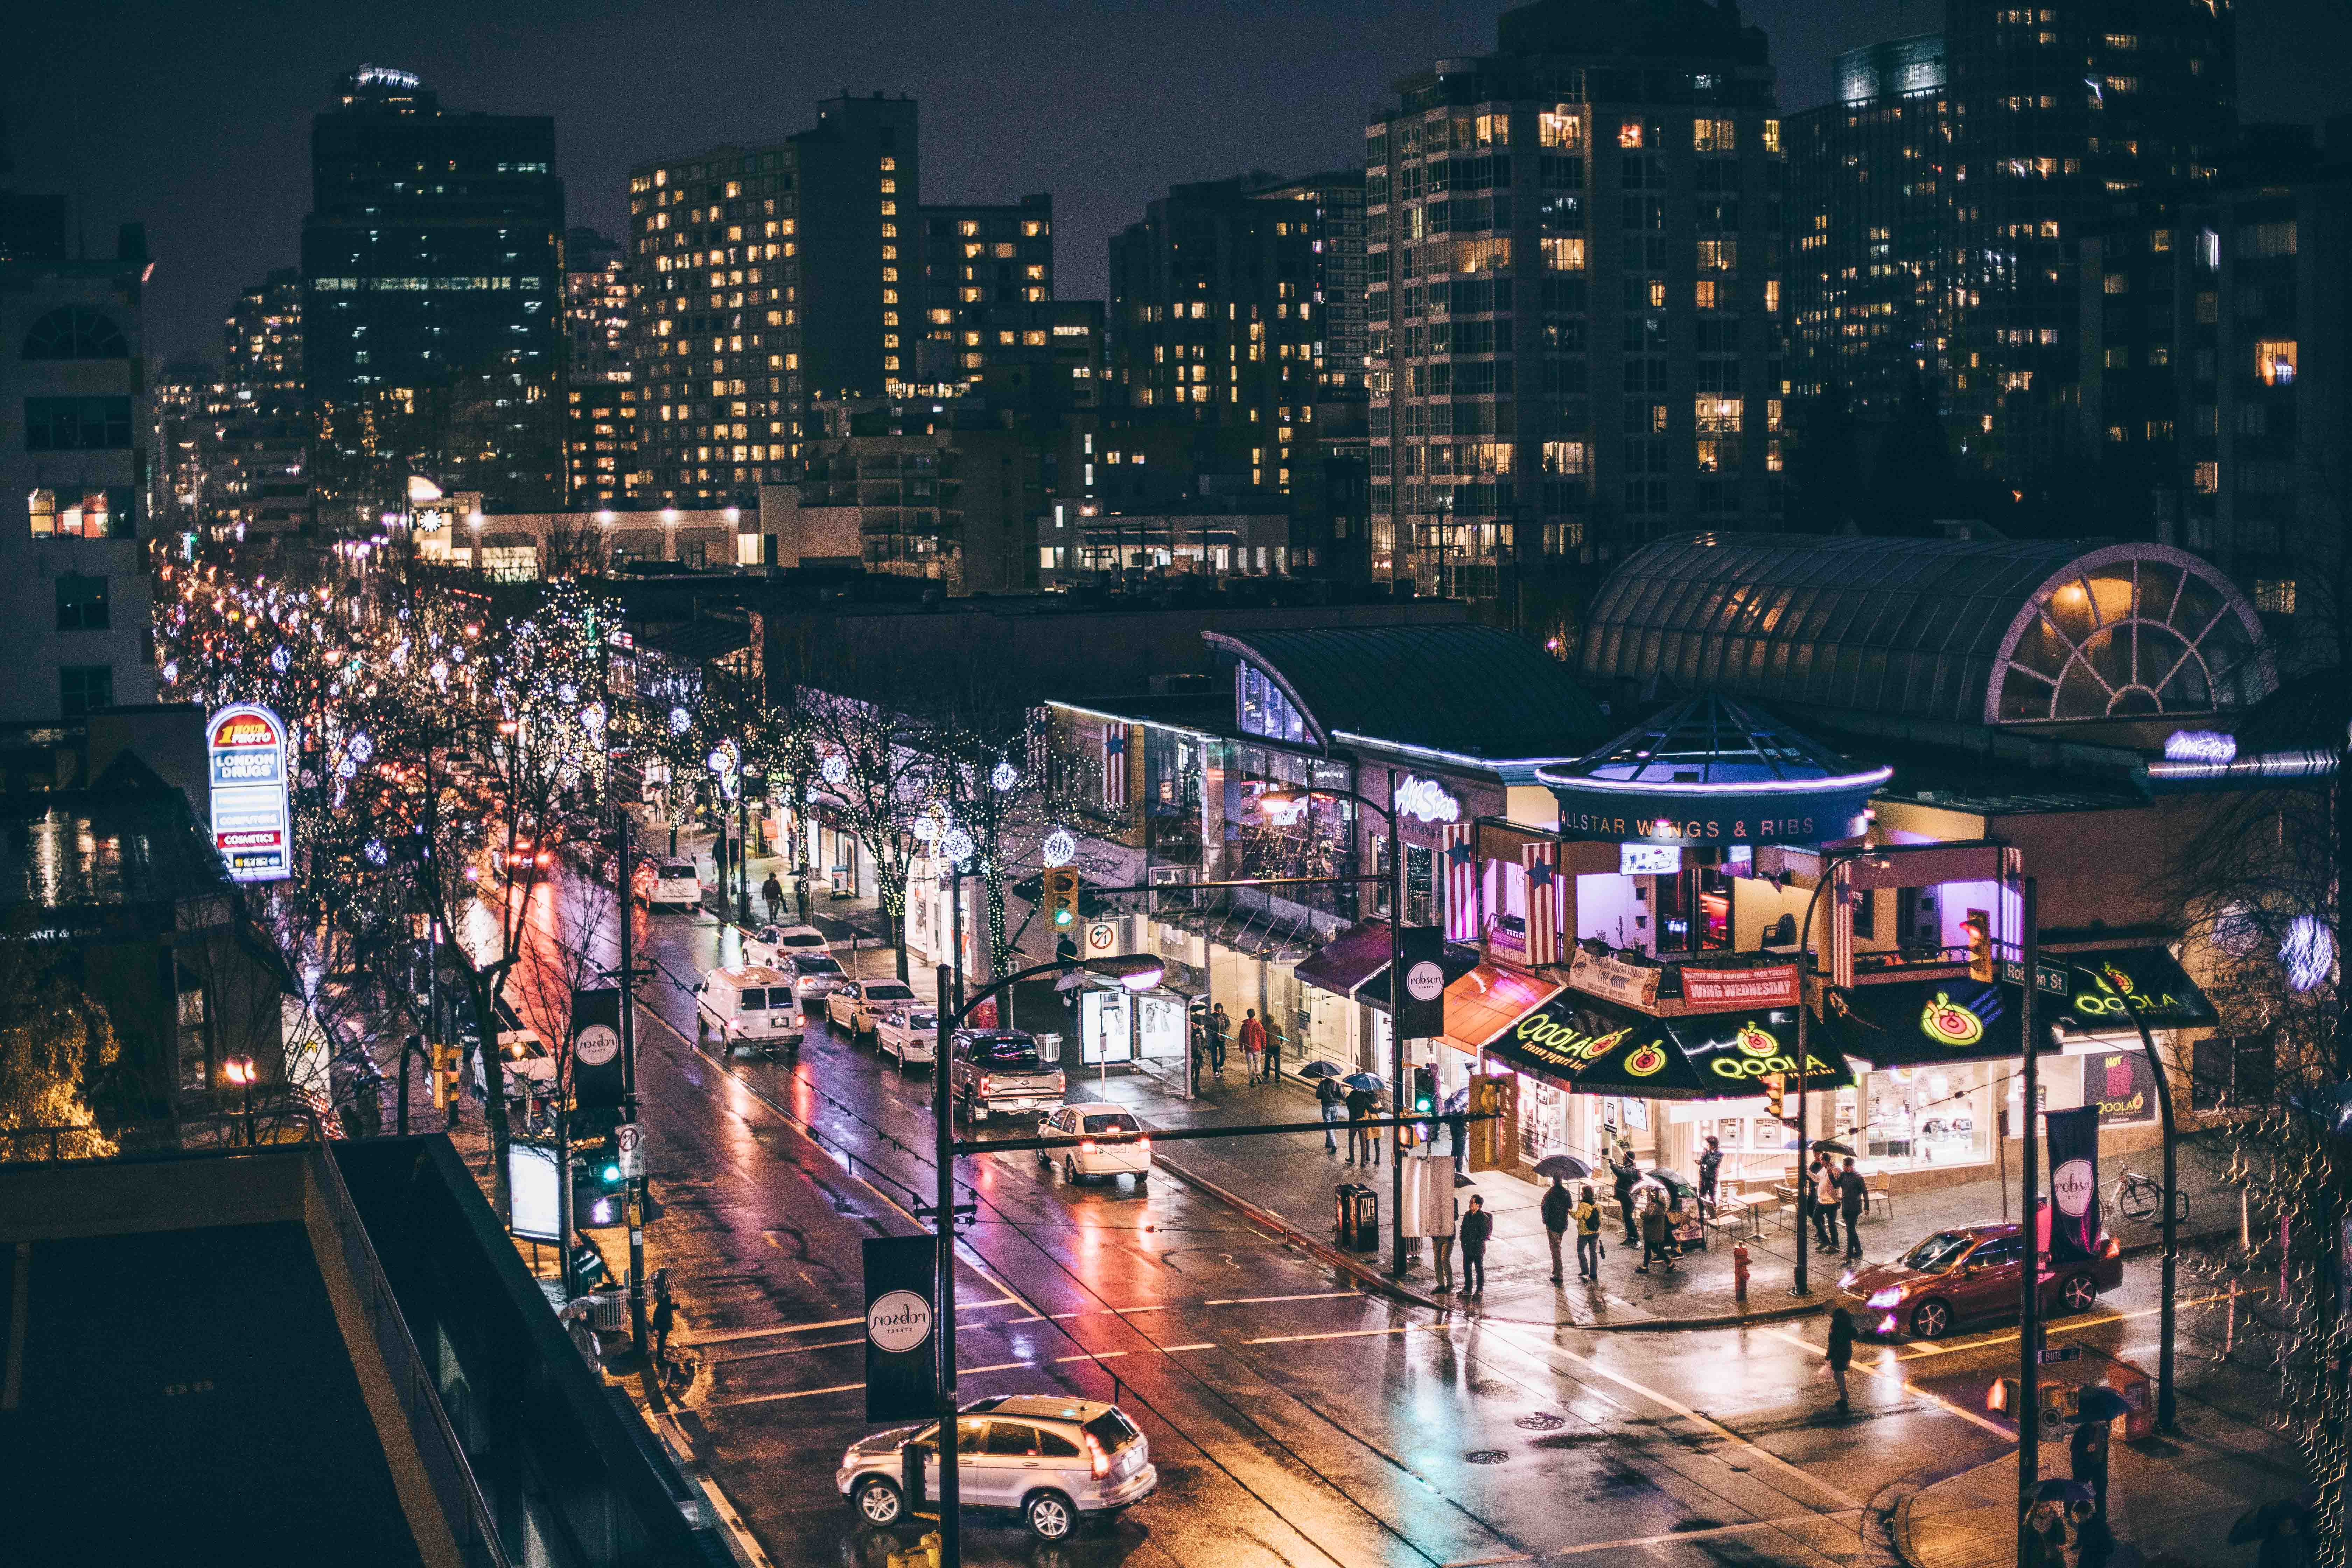 December Events Happening #onRobson - Robson Street Business